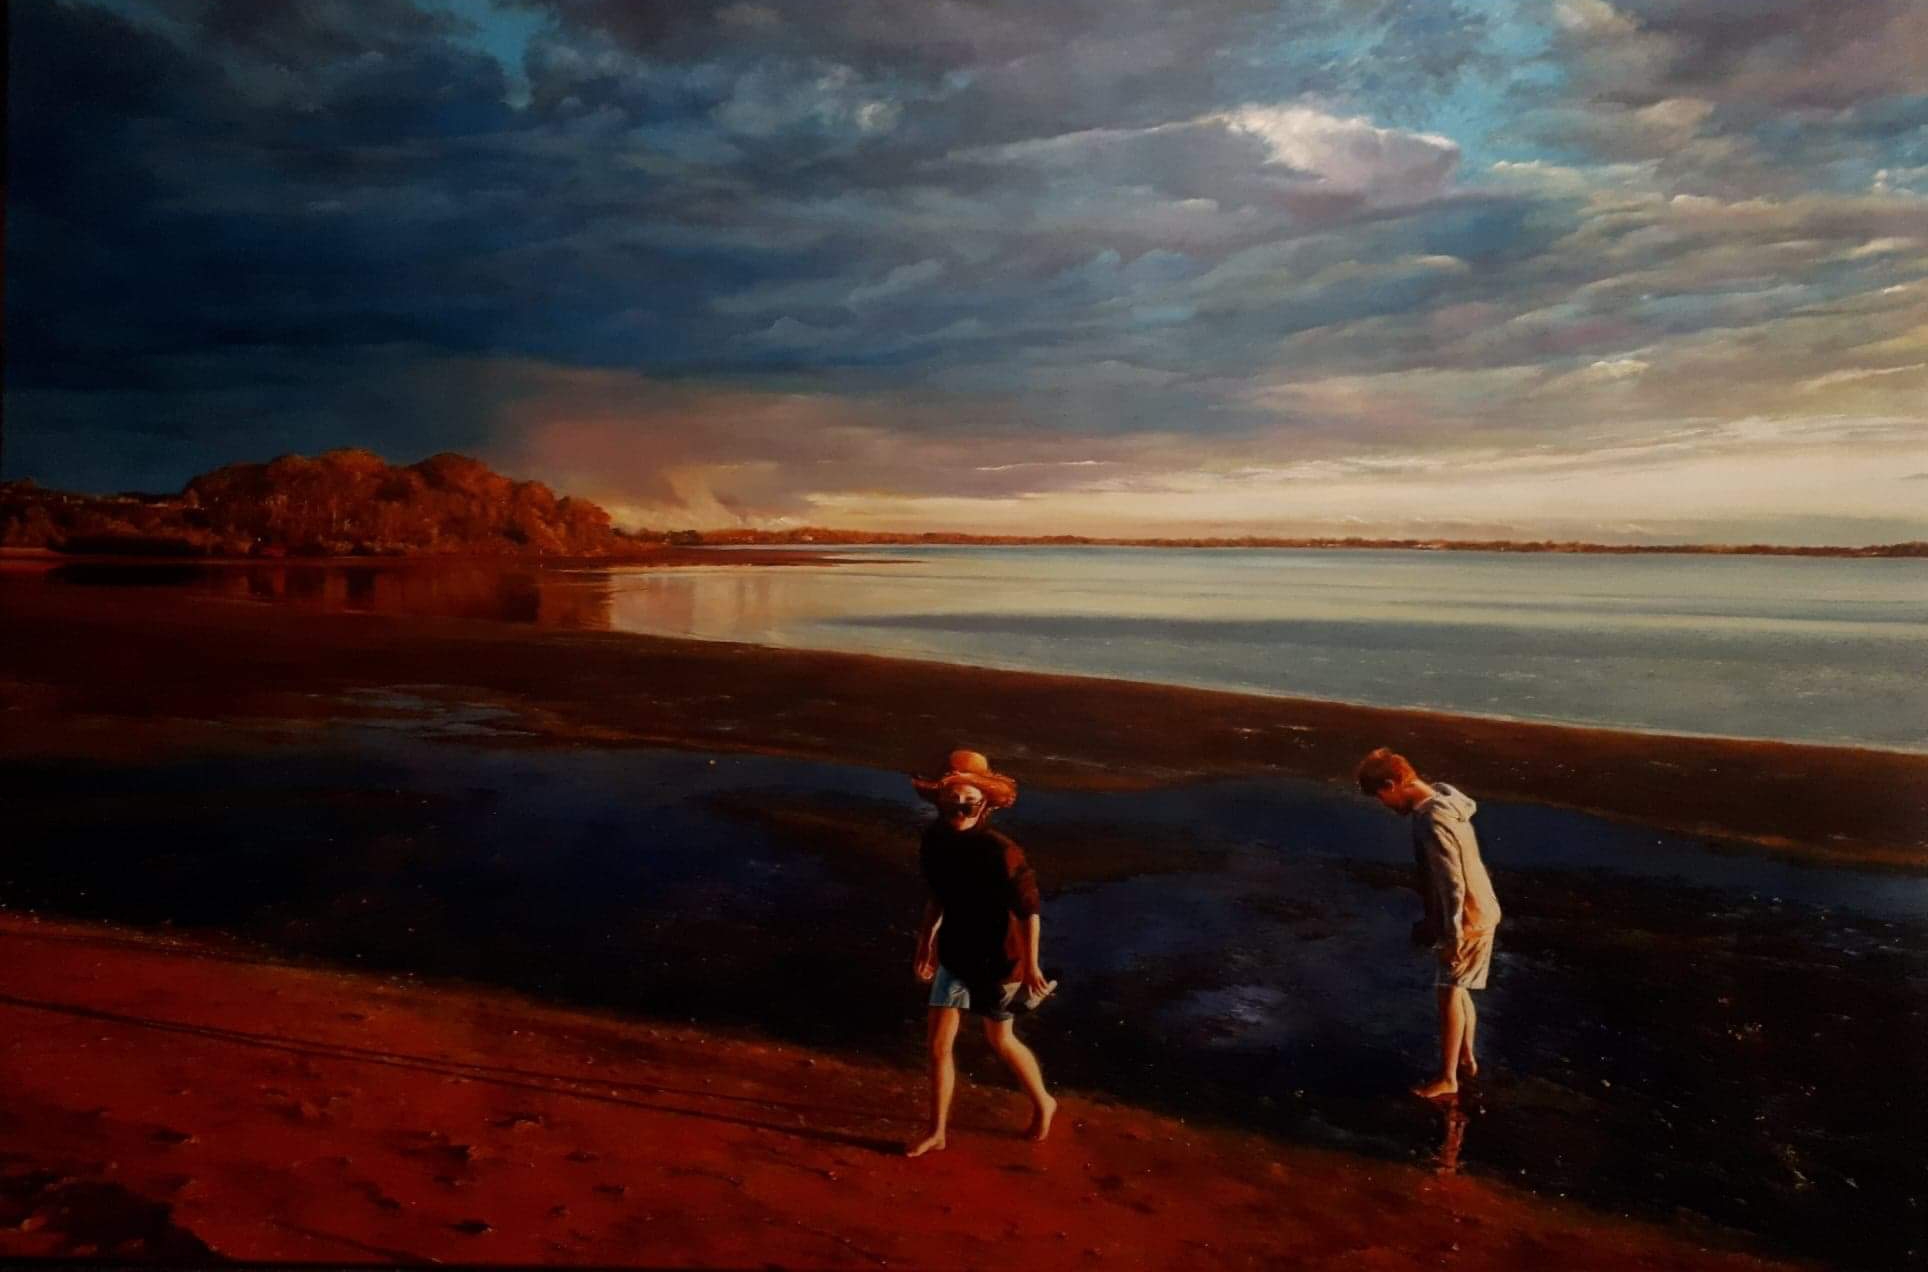 Wellington Point- After Lockdown by Anthony Quidong | Lethbridge Landscape Prize 2021 Finalists | Lethbridge Gallery